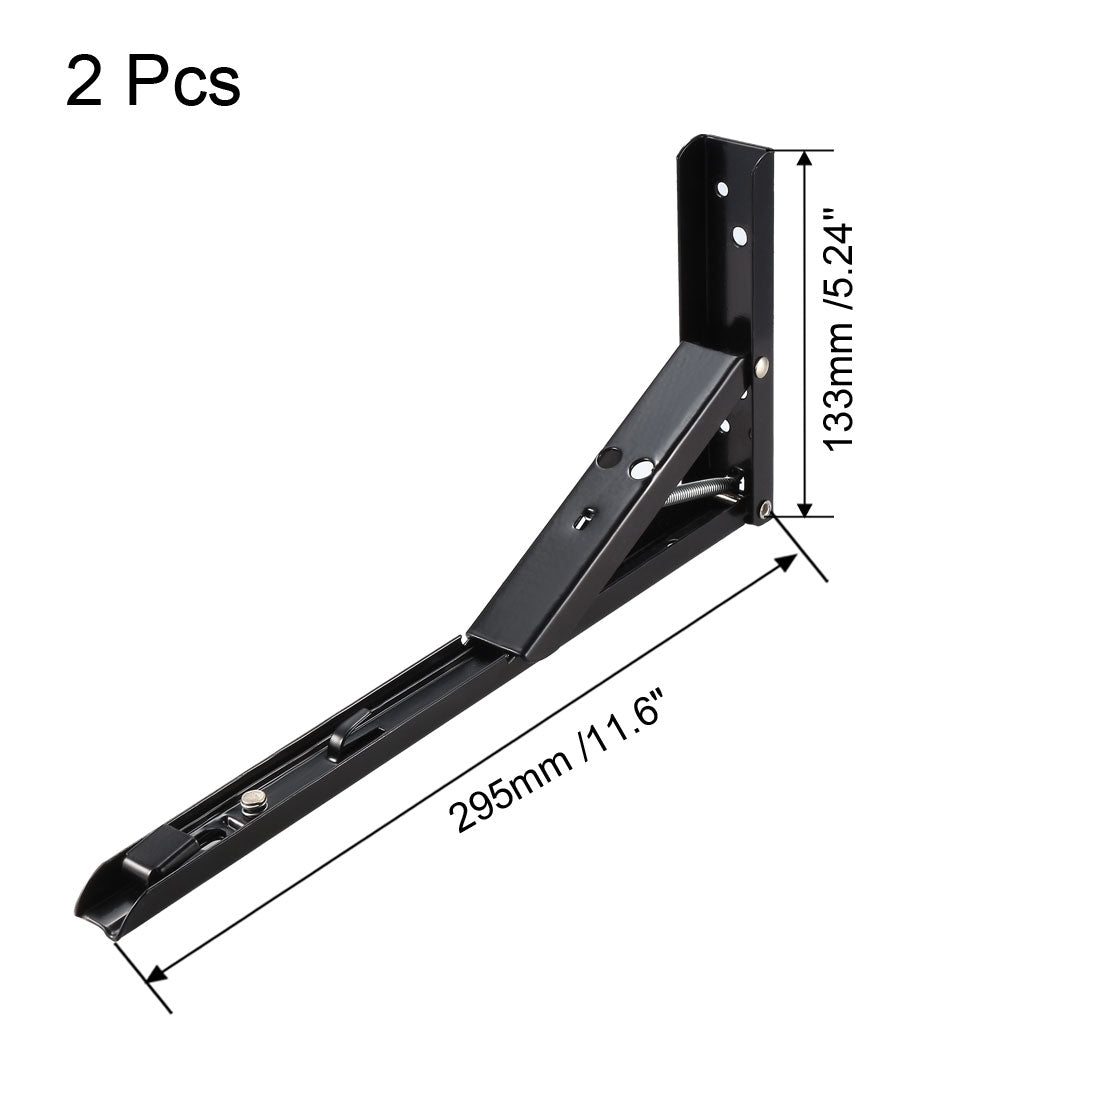 uxcell Uxcell Folding Bracket 11.6 inch 295mm for Shelves Table Desk Wall Mounted Support Collapsible Long Release Arm Space Saving Carbon Steel 2pcs